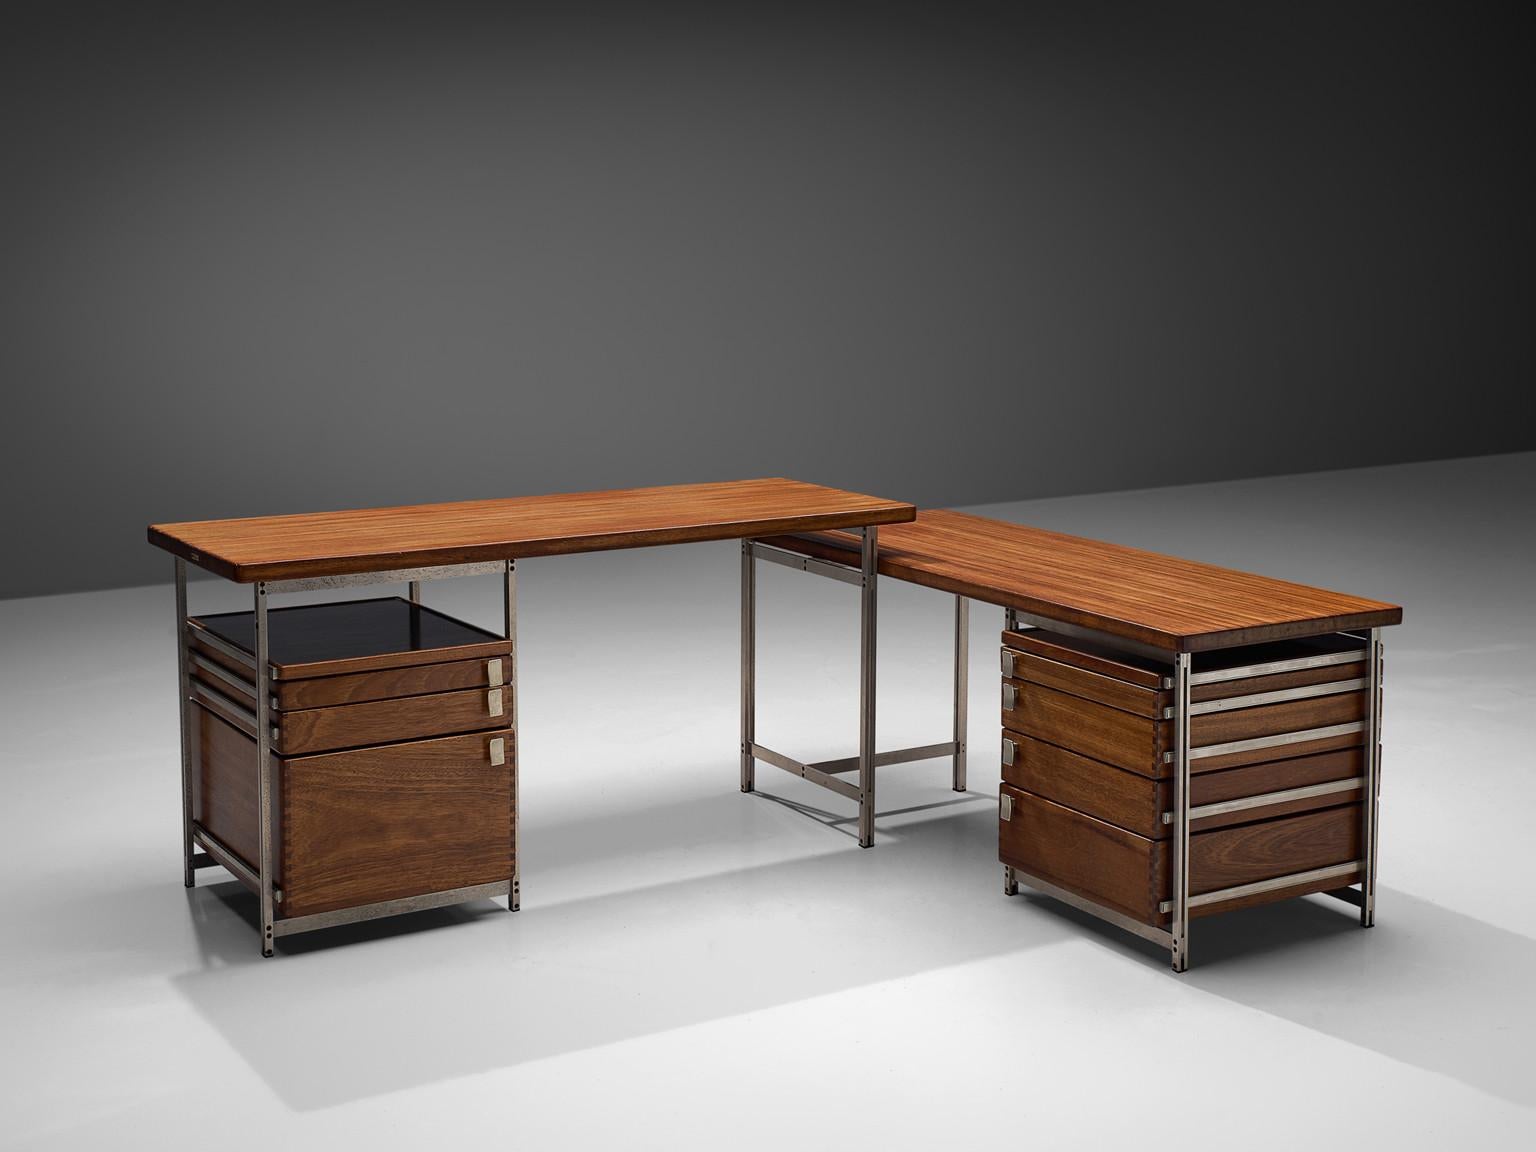 Jules Wabbes, corner writing desk, mutenyé, nickel-plated metal, aluminum, Belgium, 1957

Beautifully designed desk by one of Belgium's most renowned designers Jules Wabbes. This piece is made for the Foncolin building, one of Wabbes first large